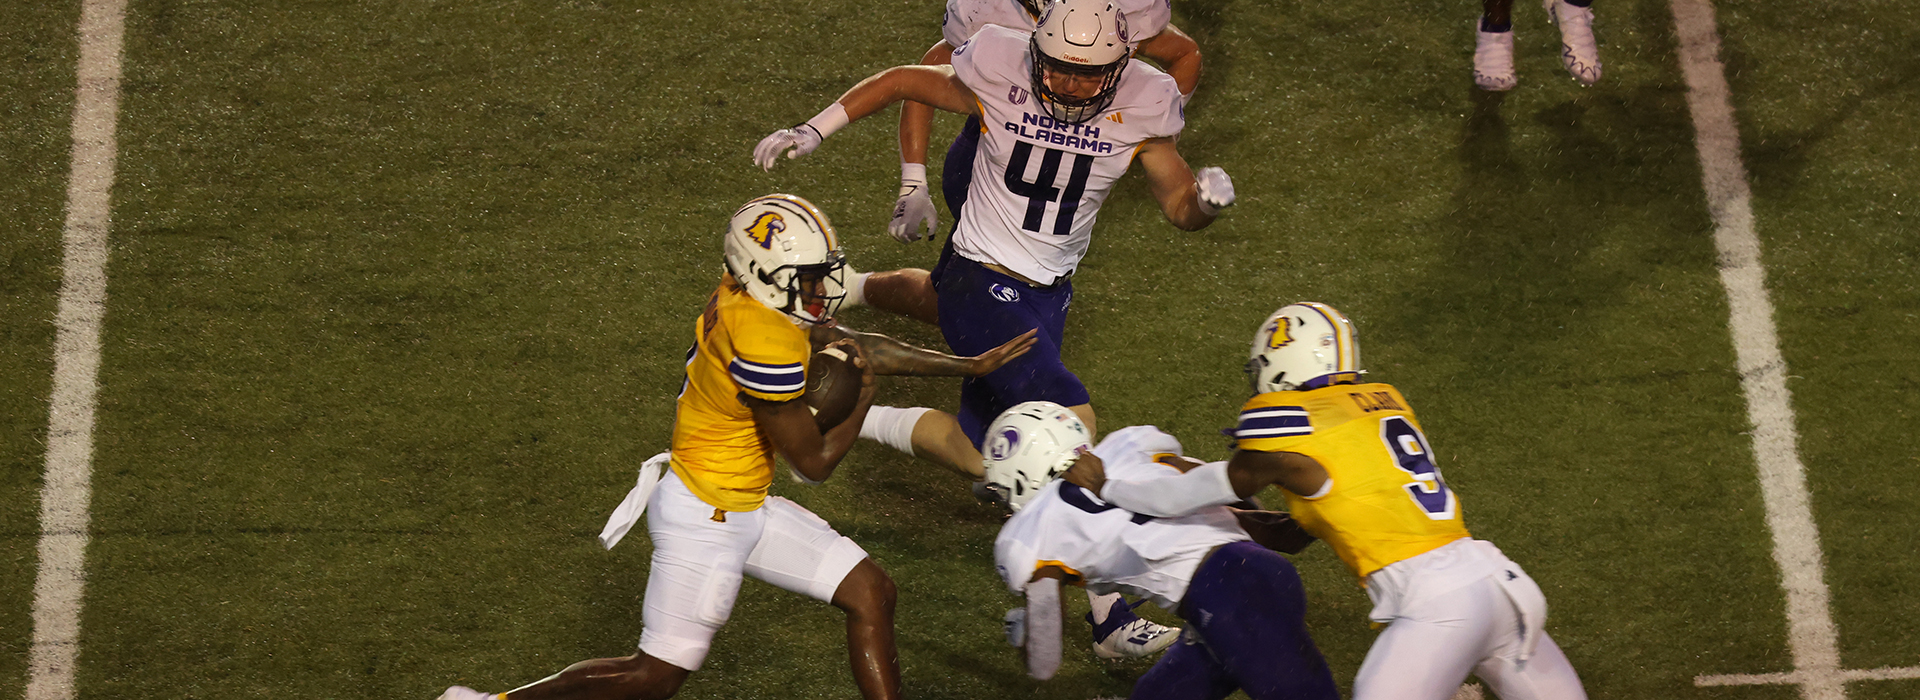 Tough night for offenses as North Alabama tops Golden Eagles